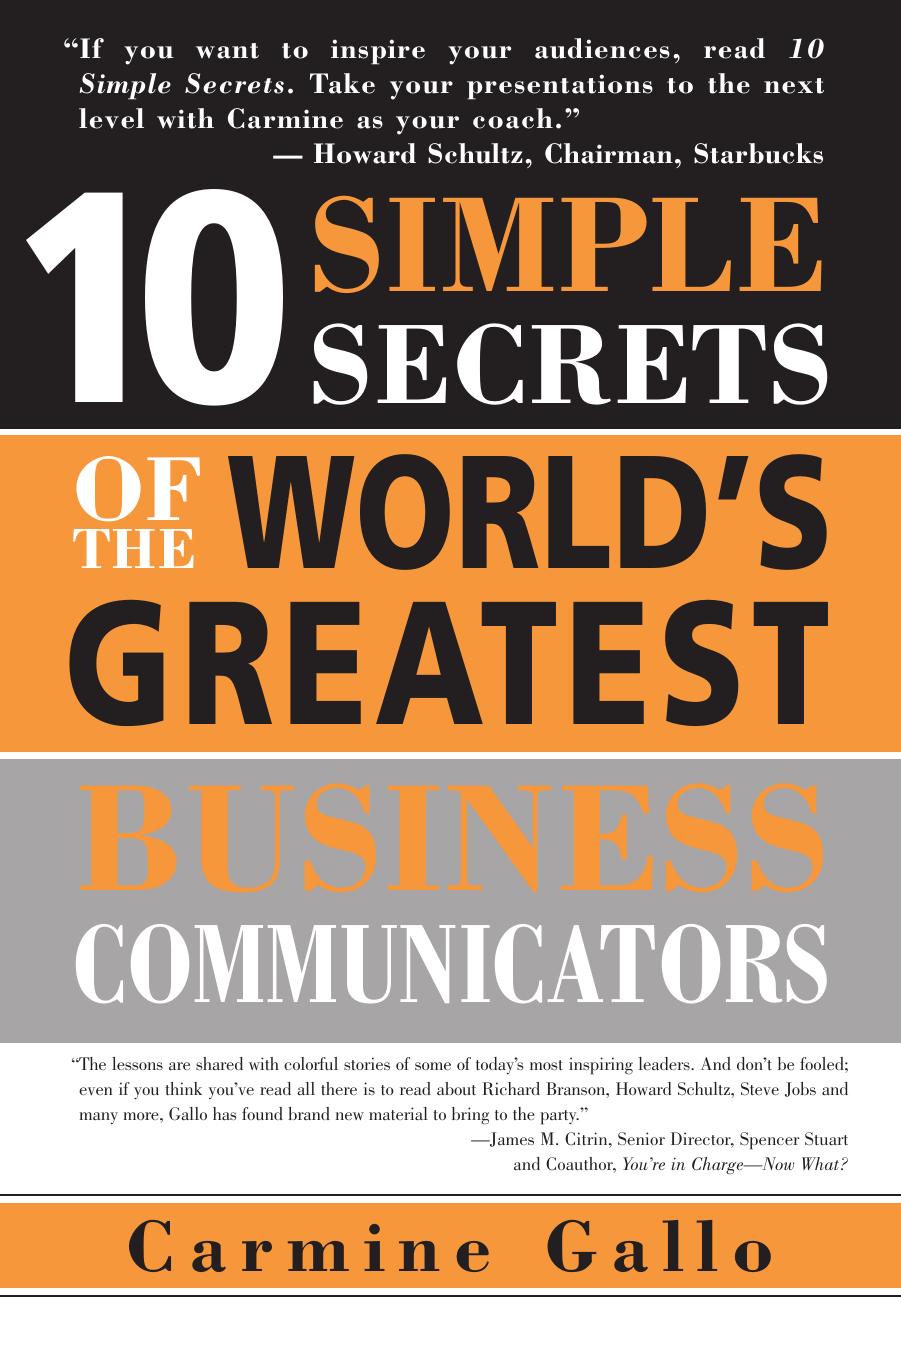 10 Simple Secrets of the World's Greatest Business Communicators by Carmine Gallo